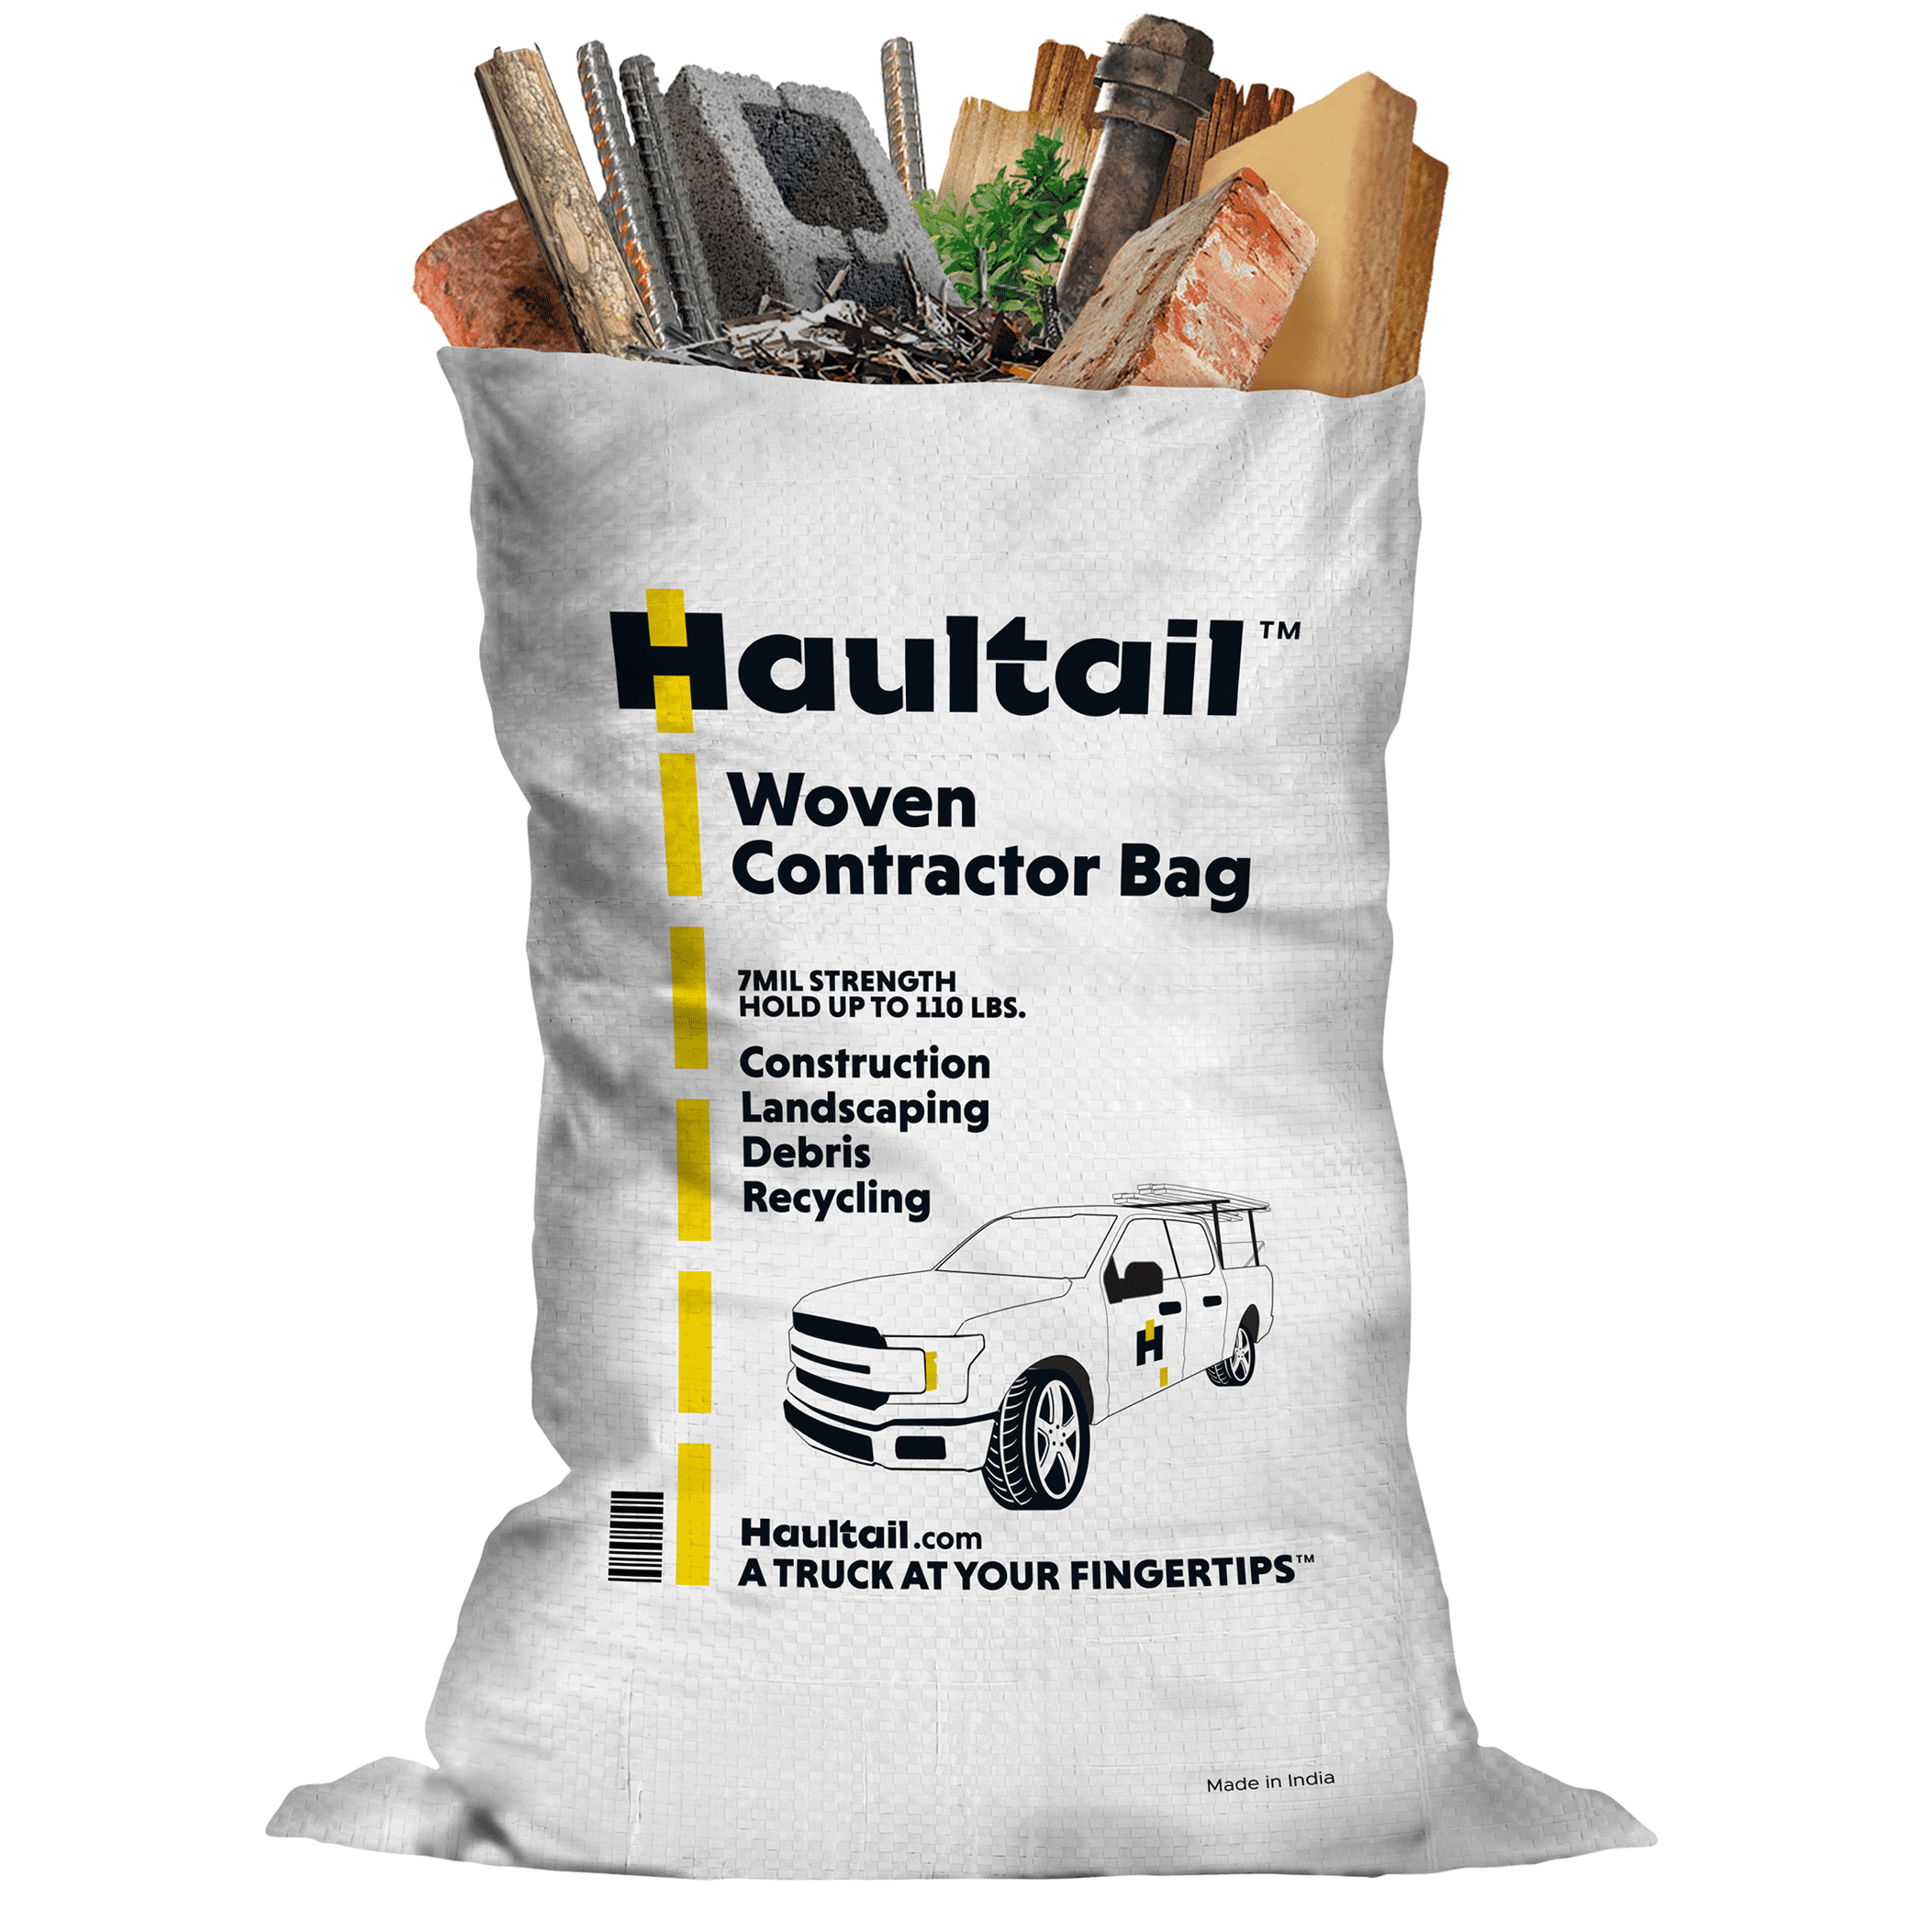 Contractor Trash Bags 42 Gal Clear 20 CT